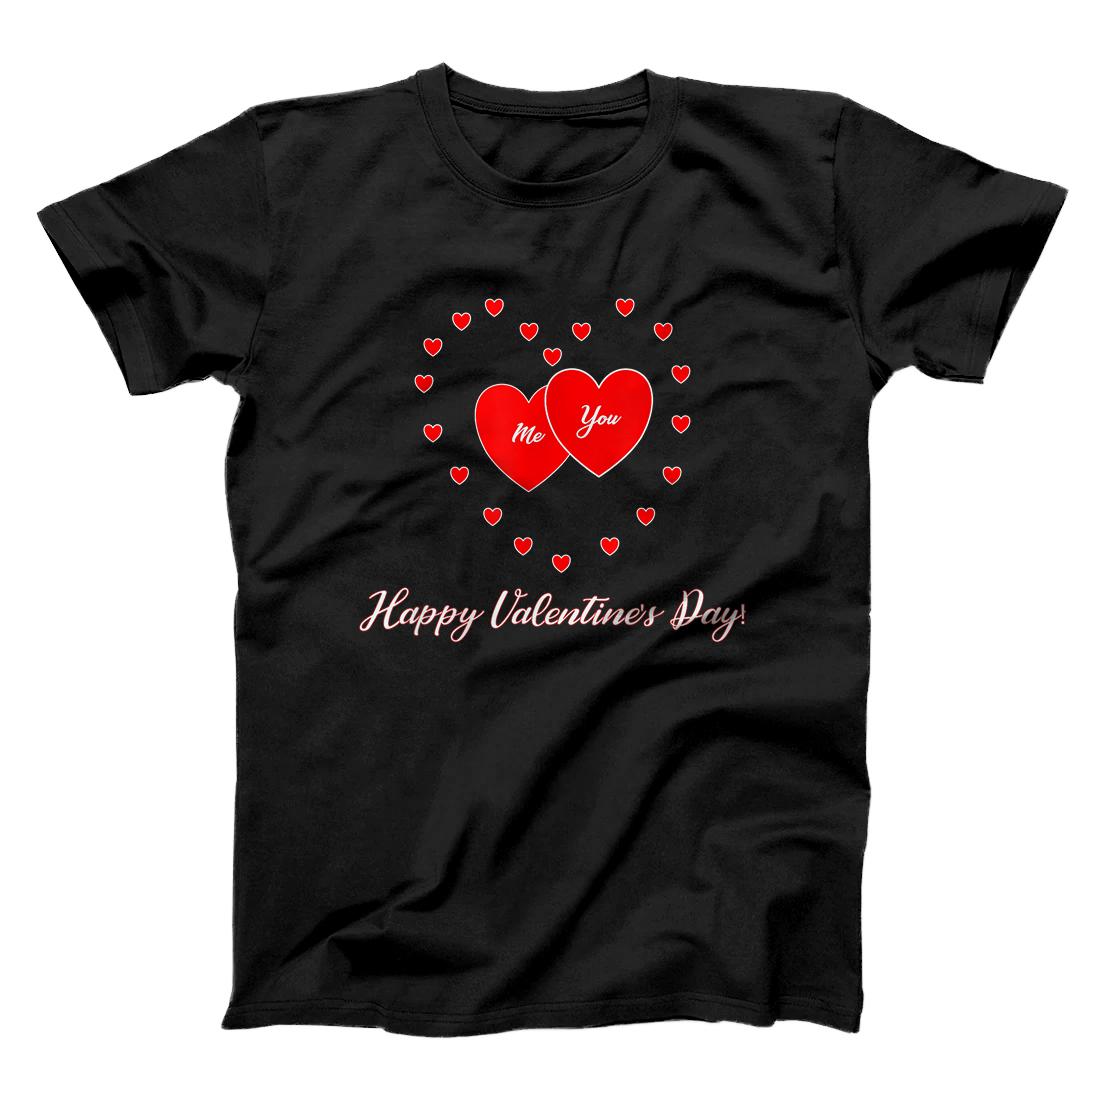 Personalized Happy Valentin's Day T-Shirt